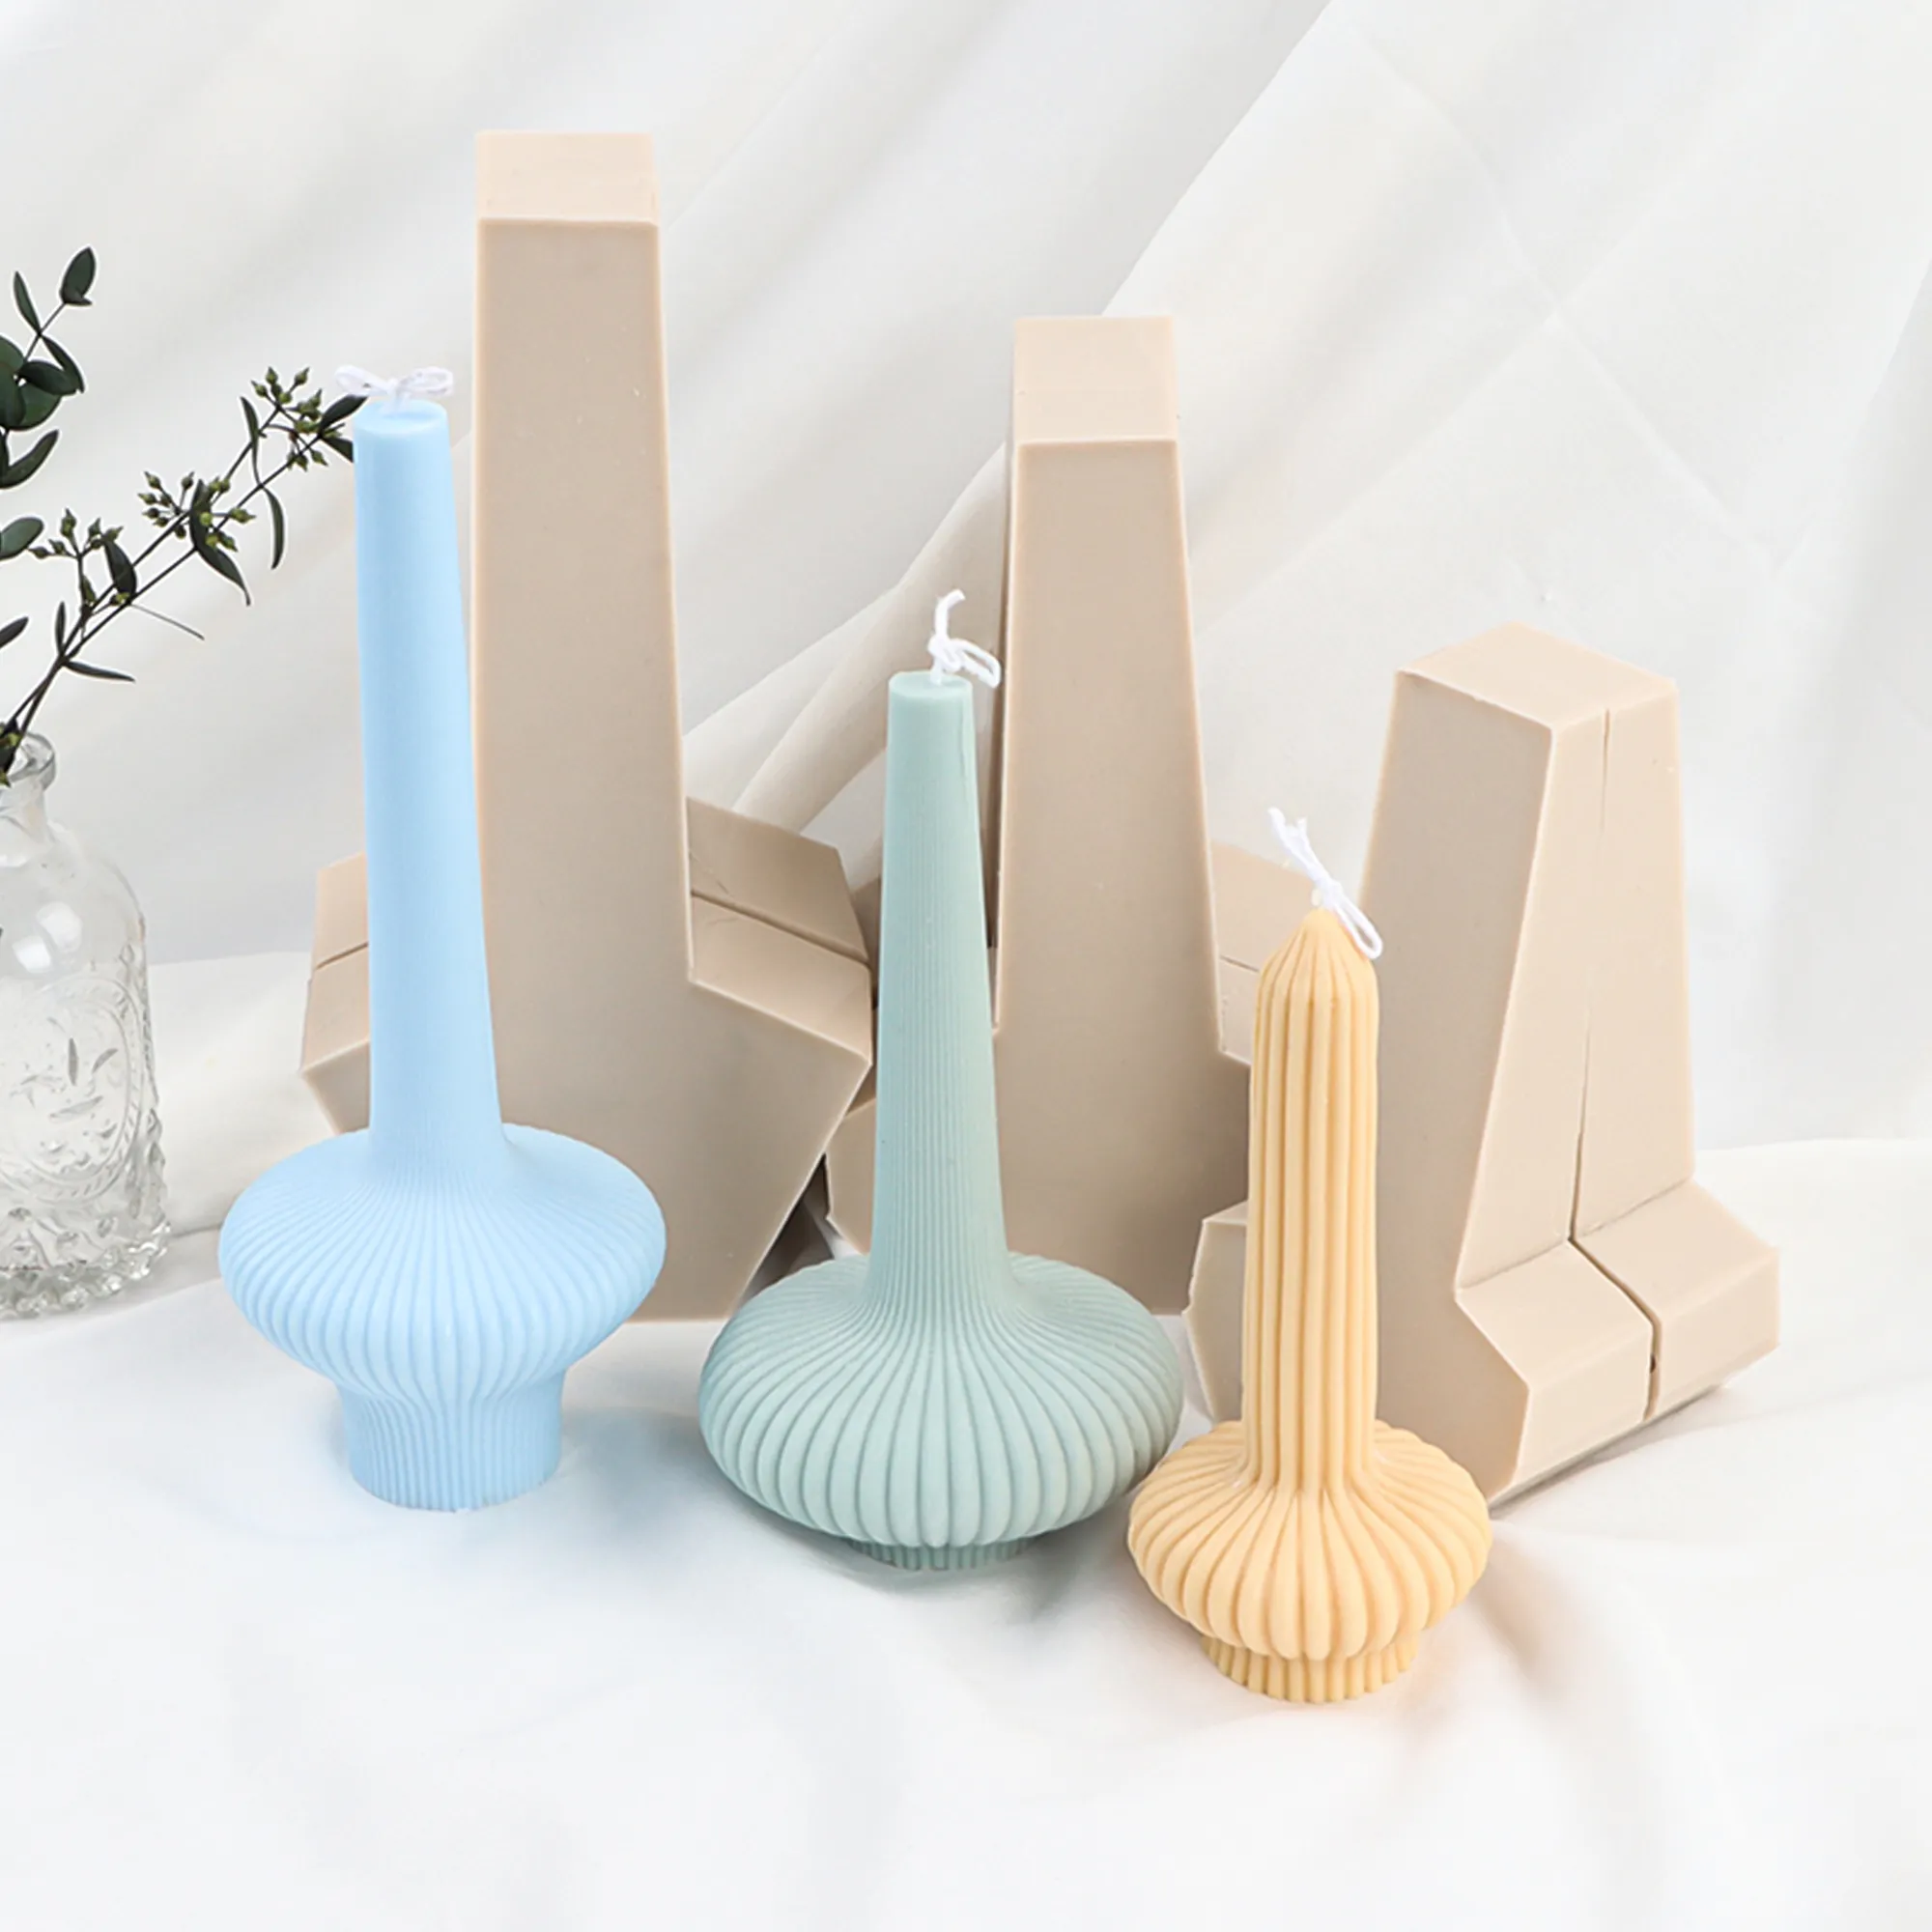 3D Vase Column Candle Silicone Mold Strip Pillar Rund Bottom Aroma Gips Diffusor Stone Mold Soap Making Home Ornament